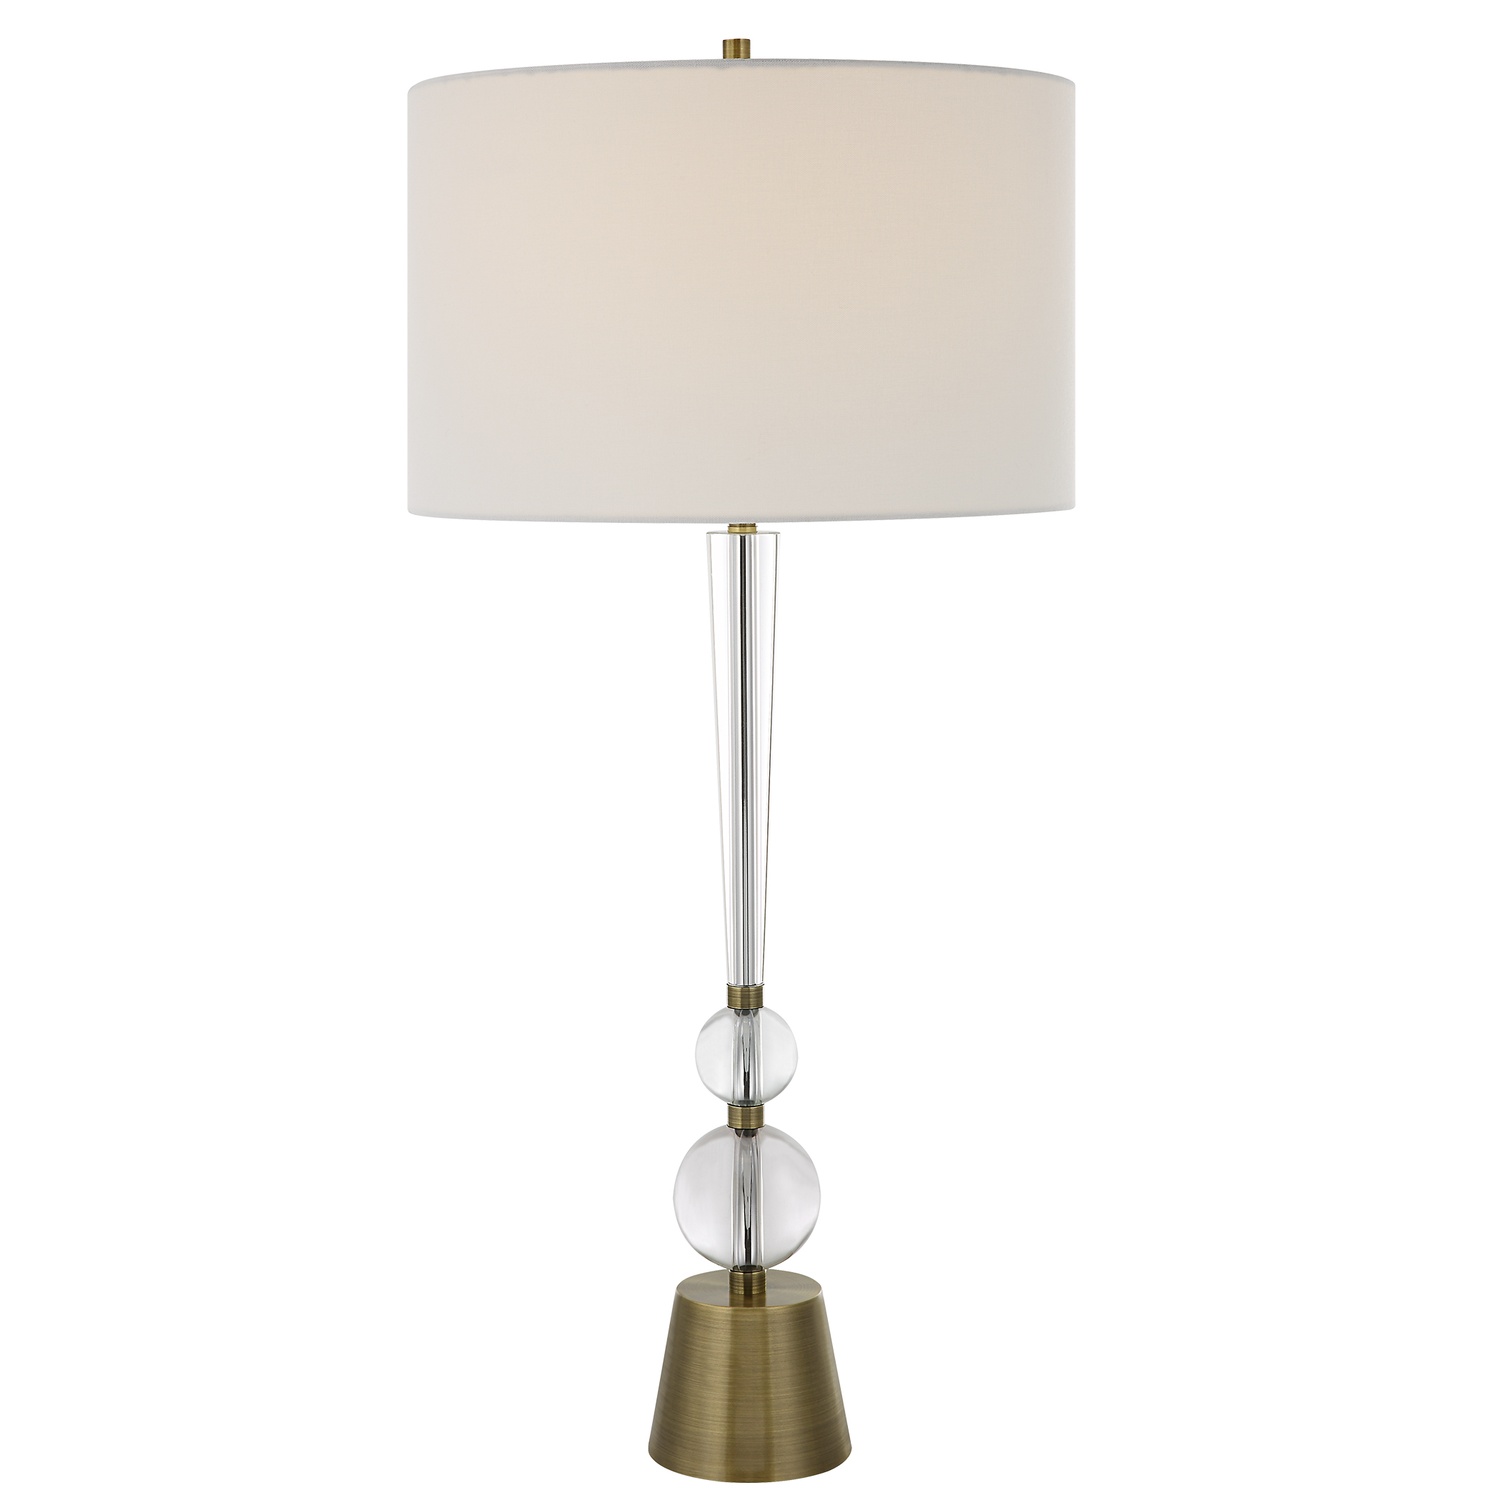 Annily-Crystal Table Lamp